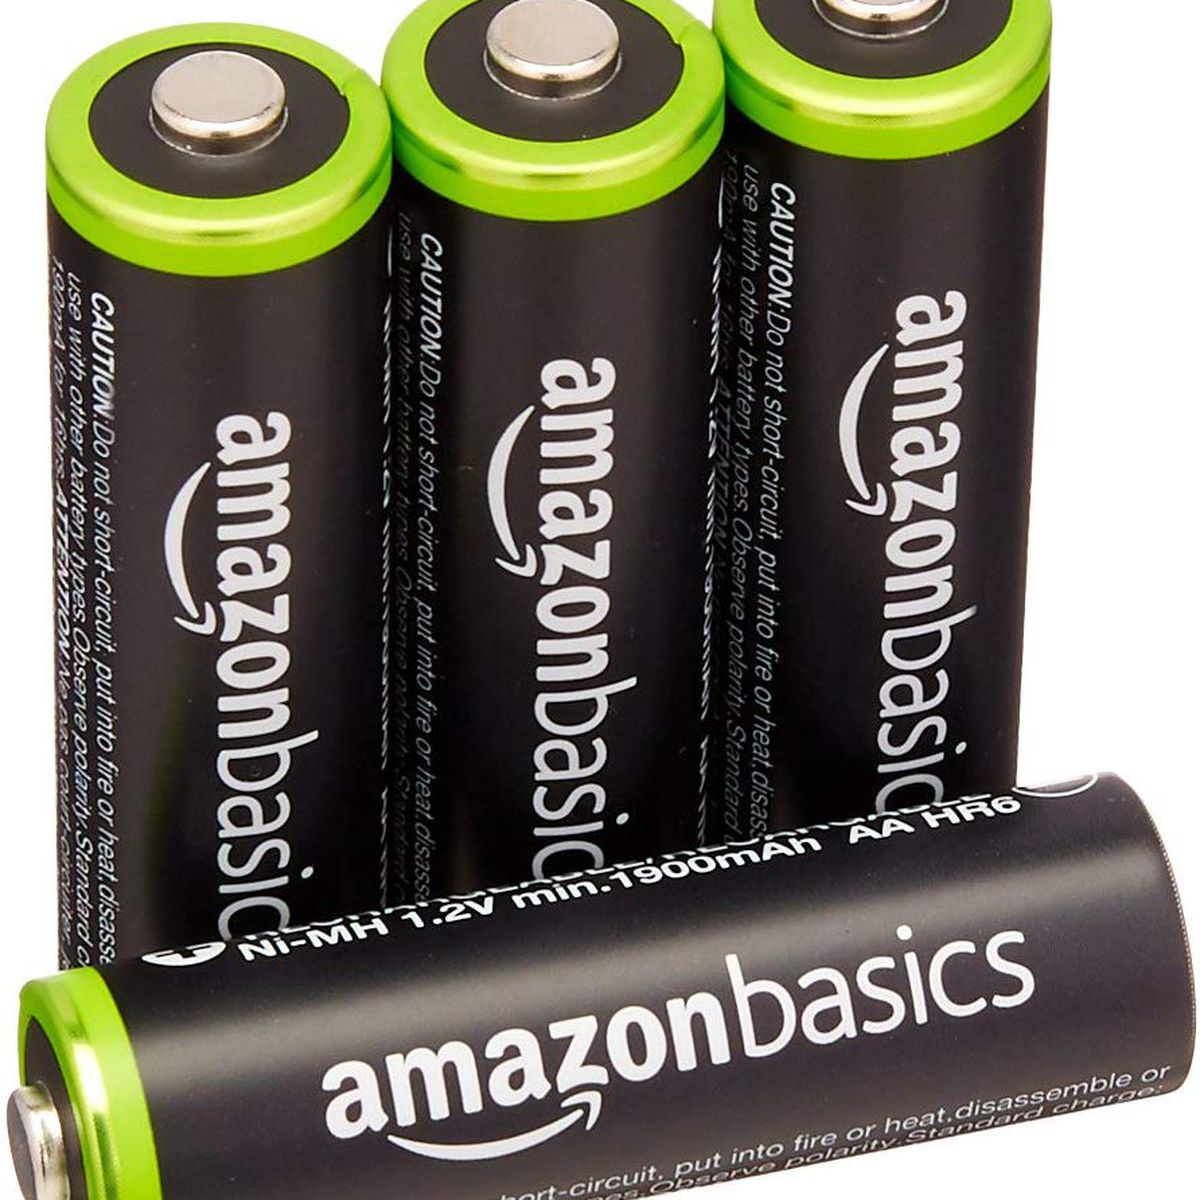 A product shot of four Amazon basics rechargeable batteries